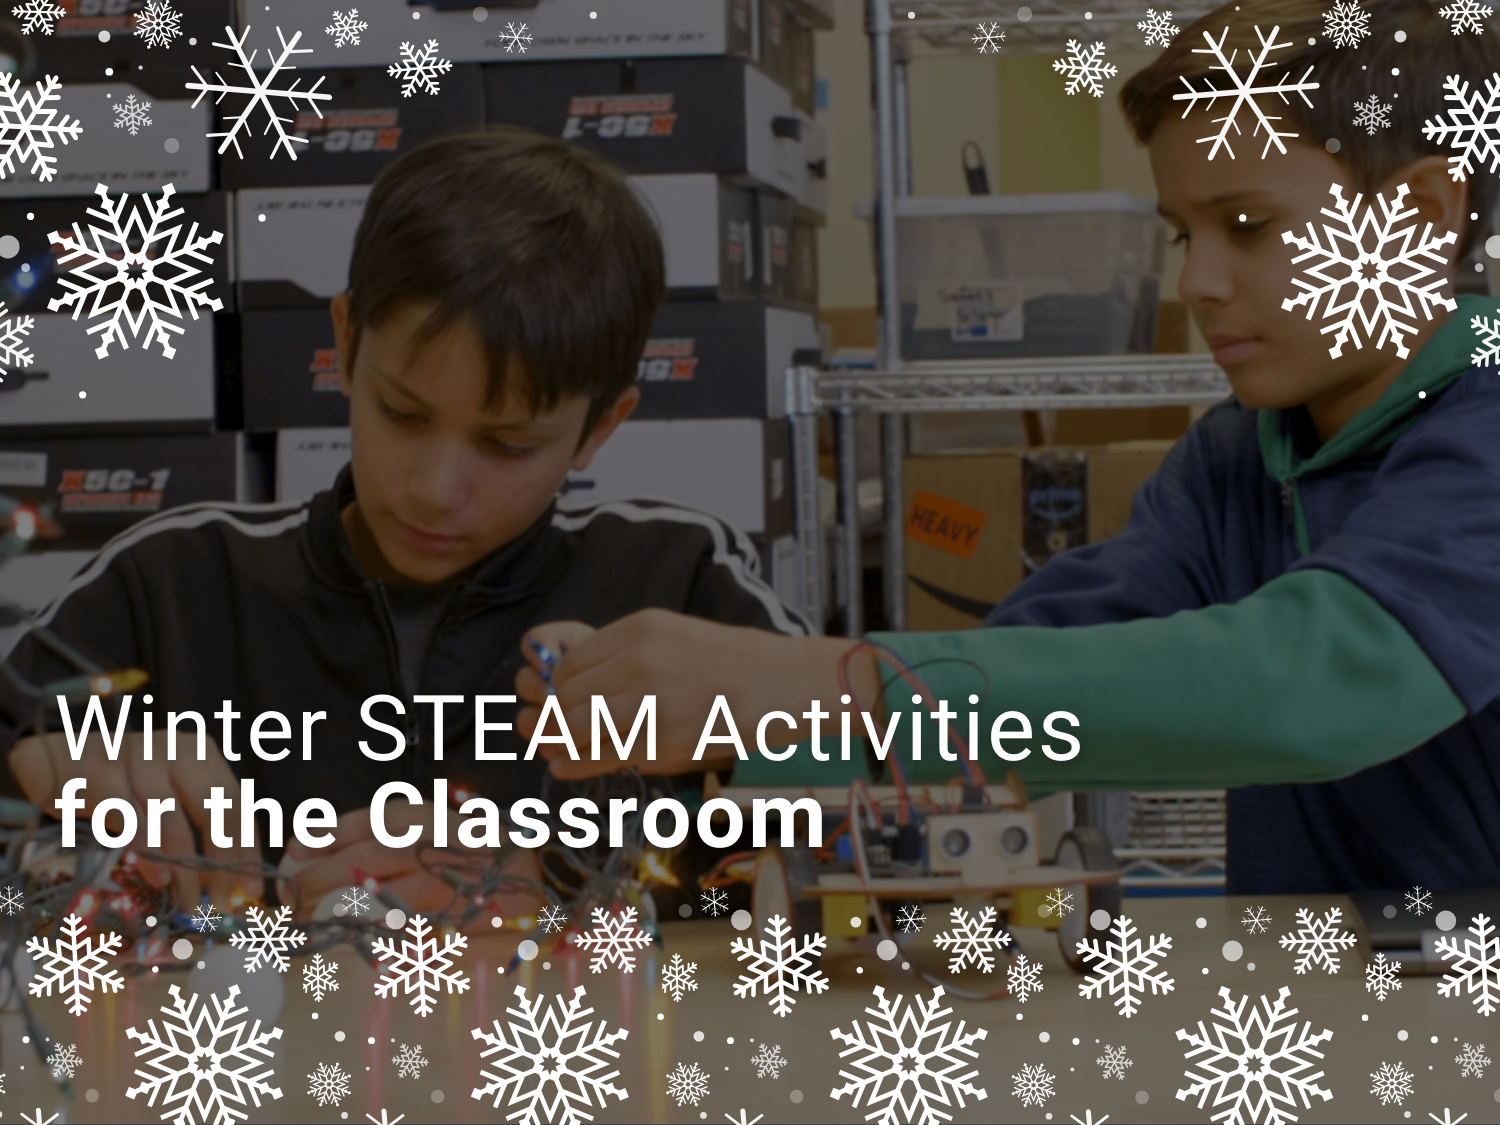 Winter STEAM Activities for the Classroom